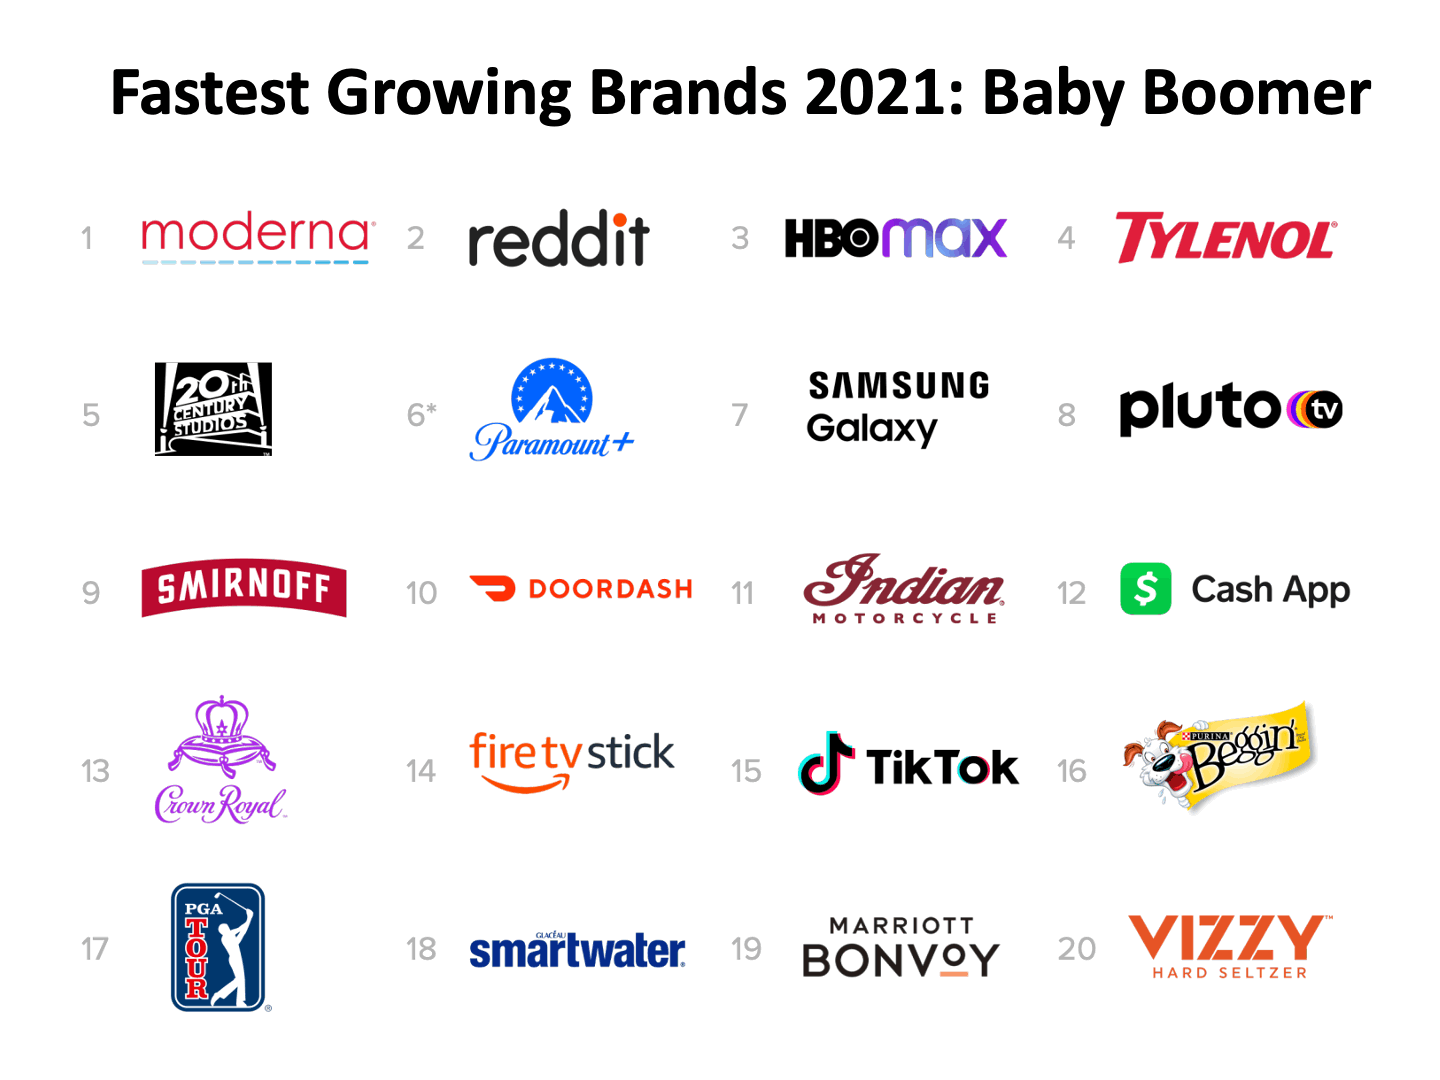 Fastest Growing Brands 2021: Baby Boomer